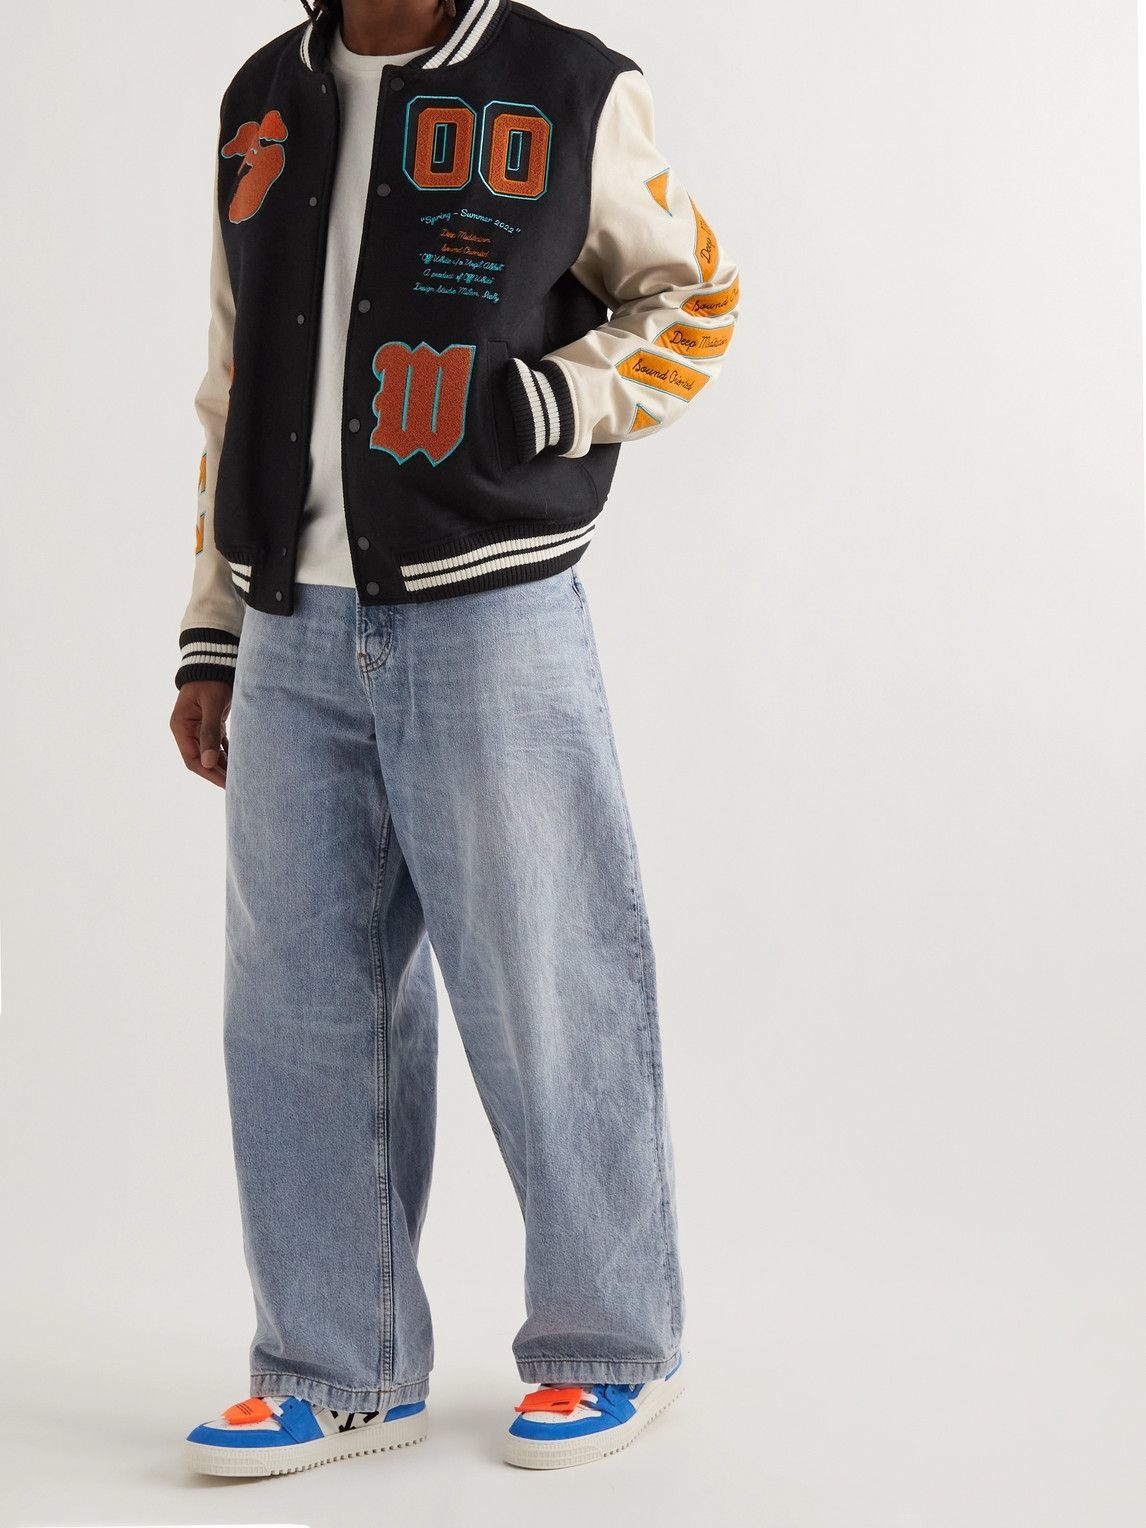 Off-White Moon Wool and Leather Varsity Jacket